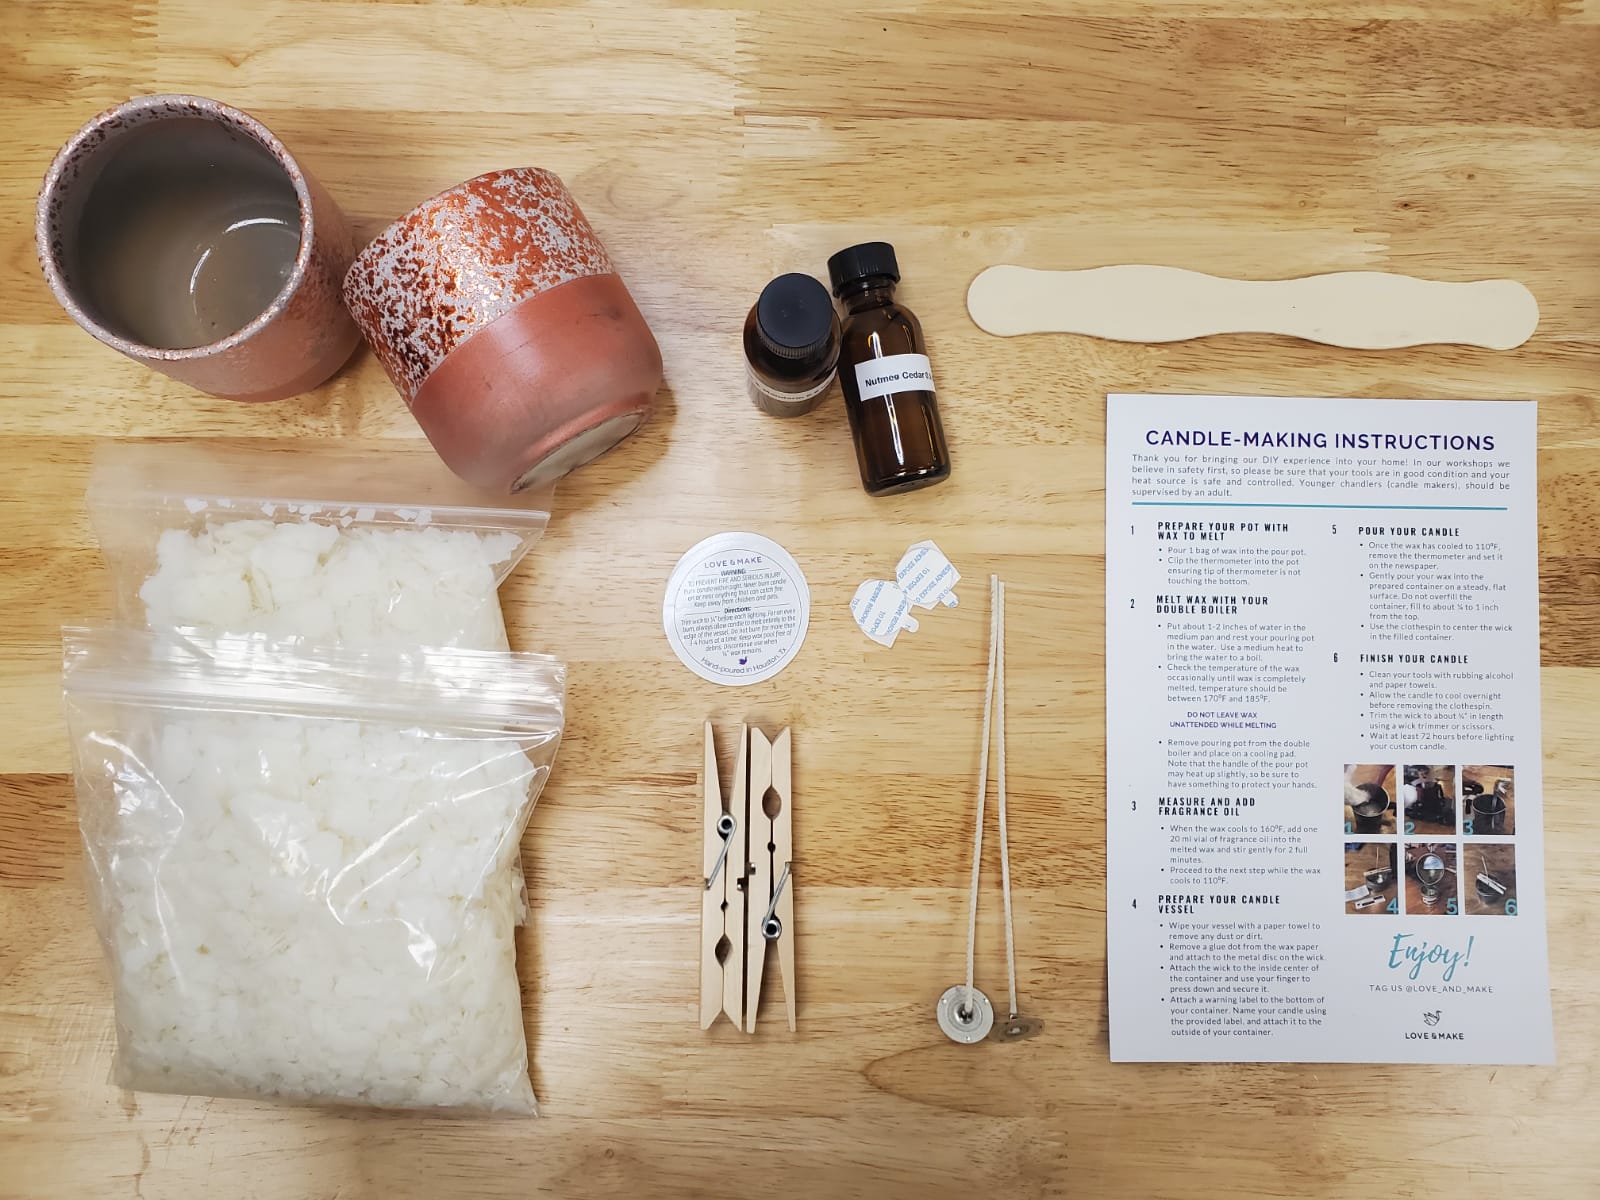 Chai Spice  Candle Making Kit – Selfmade Candle